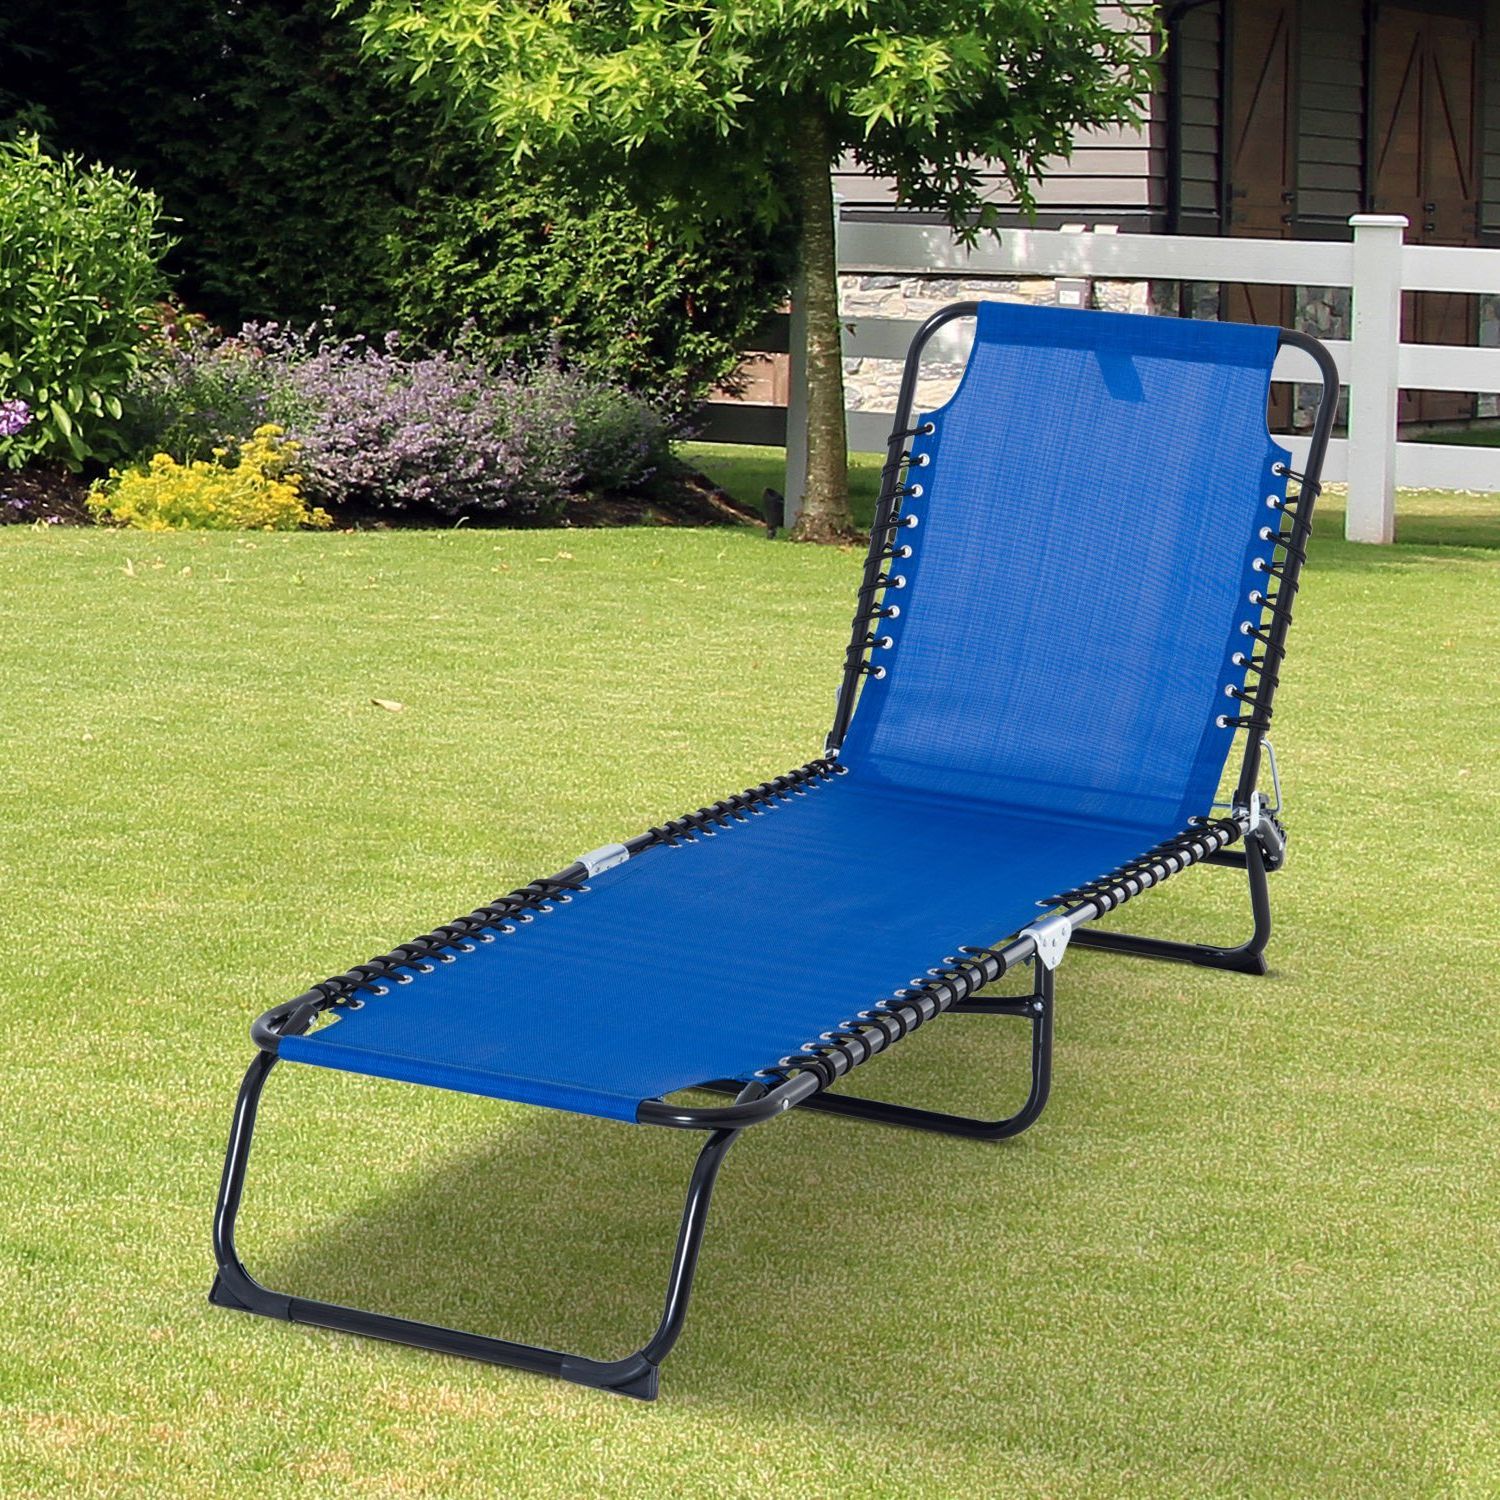 3 Position Portable Reclining Beach Chaise Lounge Outdoor Patio Adjustable  Sleeping Bed – Dark Blue In Preferred 3 Position Portable Reclining Beach Chaise Lounges (View 10 of 25)